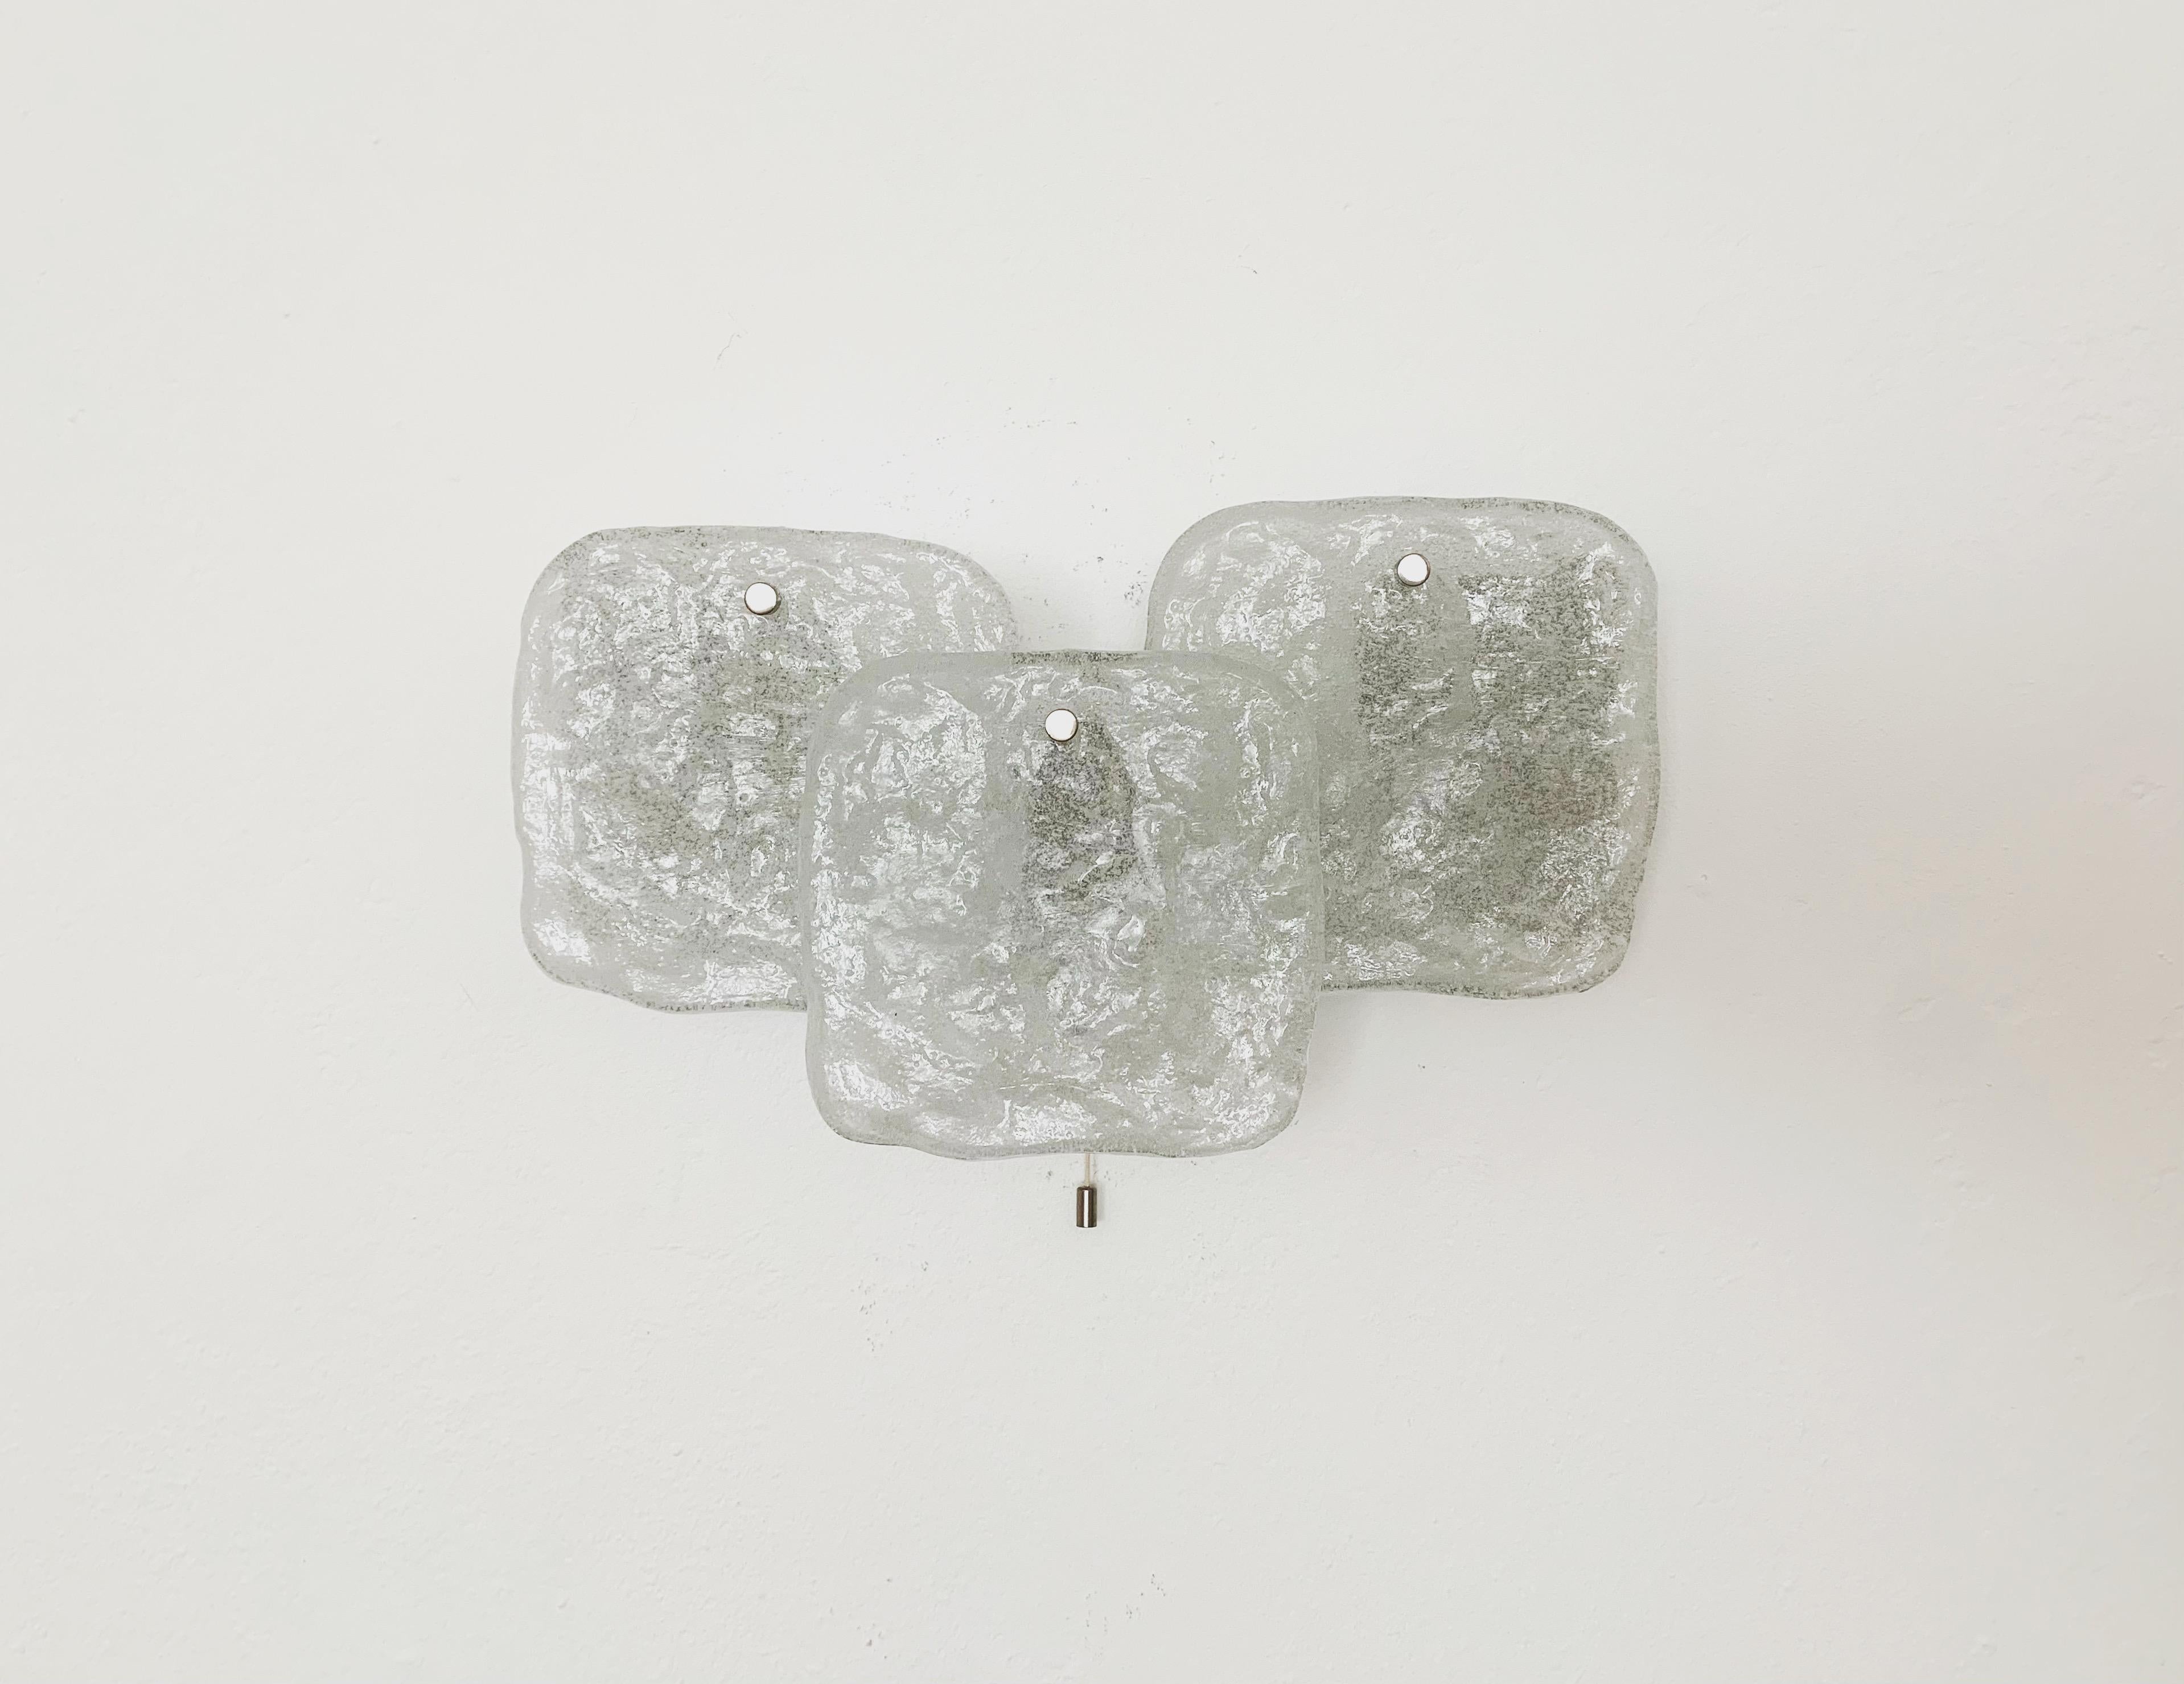 Stunning Murano glass wall lamp from the 1960s.
The 3 heavy ice glass elements spread an elegant light.
High quality.

Condition:

Very good vintage condition with slight signs of wear consistent with age.
The metal parts are